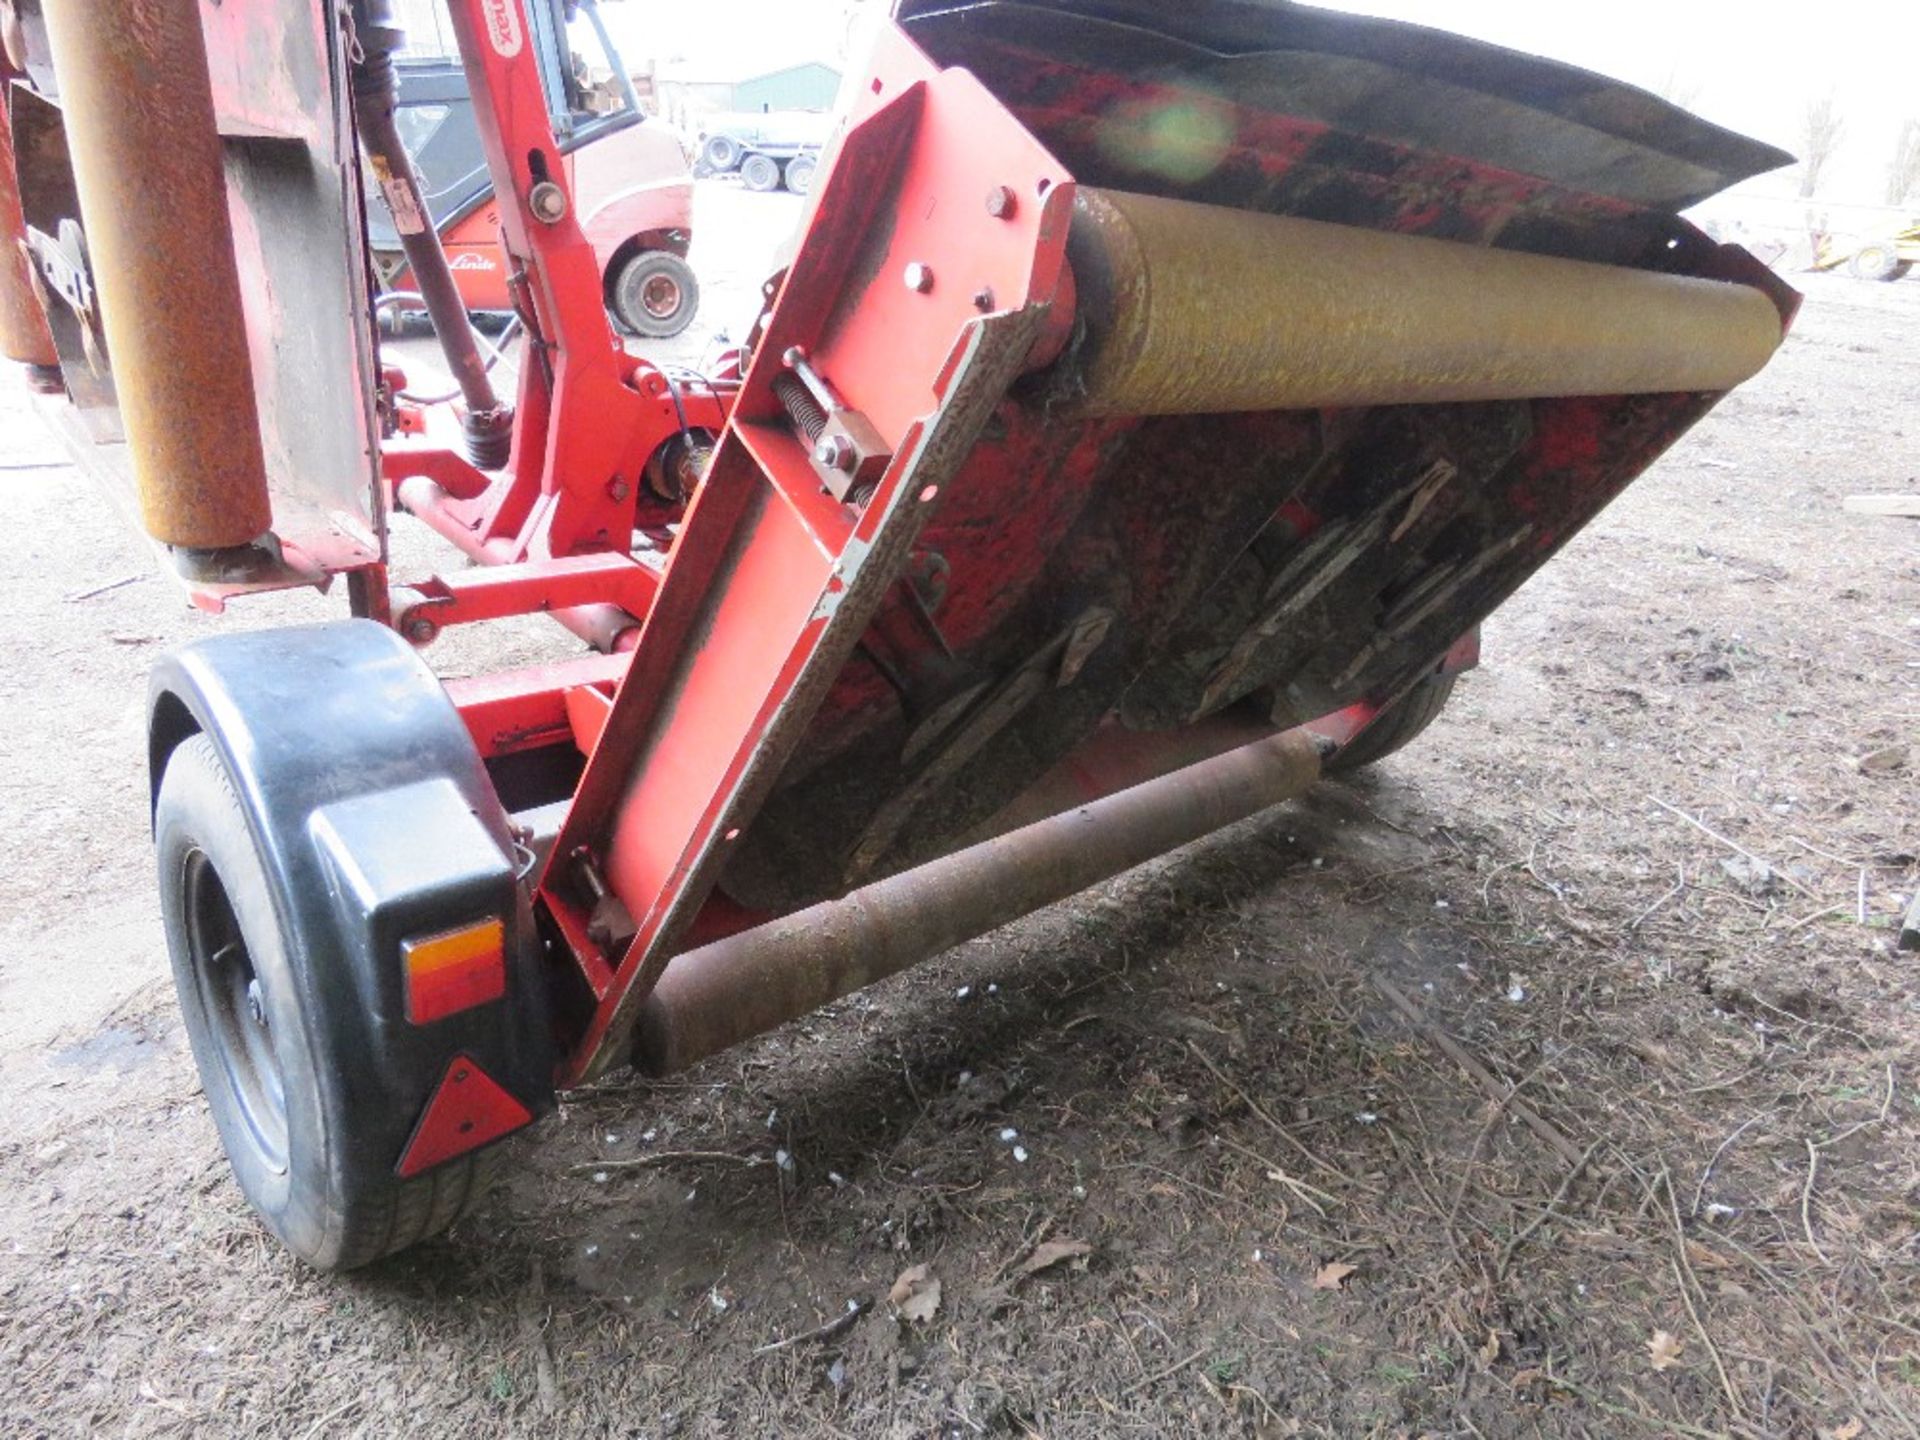 TRIMAX 728-610-400 BATWING TYPE ROLLER MOWER, YEAR 2017. PEGASUS S3 HEADS. NB: REQUIRES REPAIR TO CH - Image 5 of 14